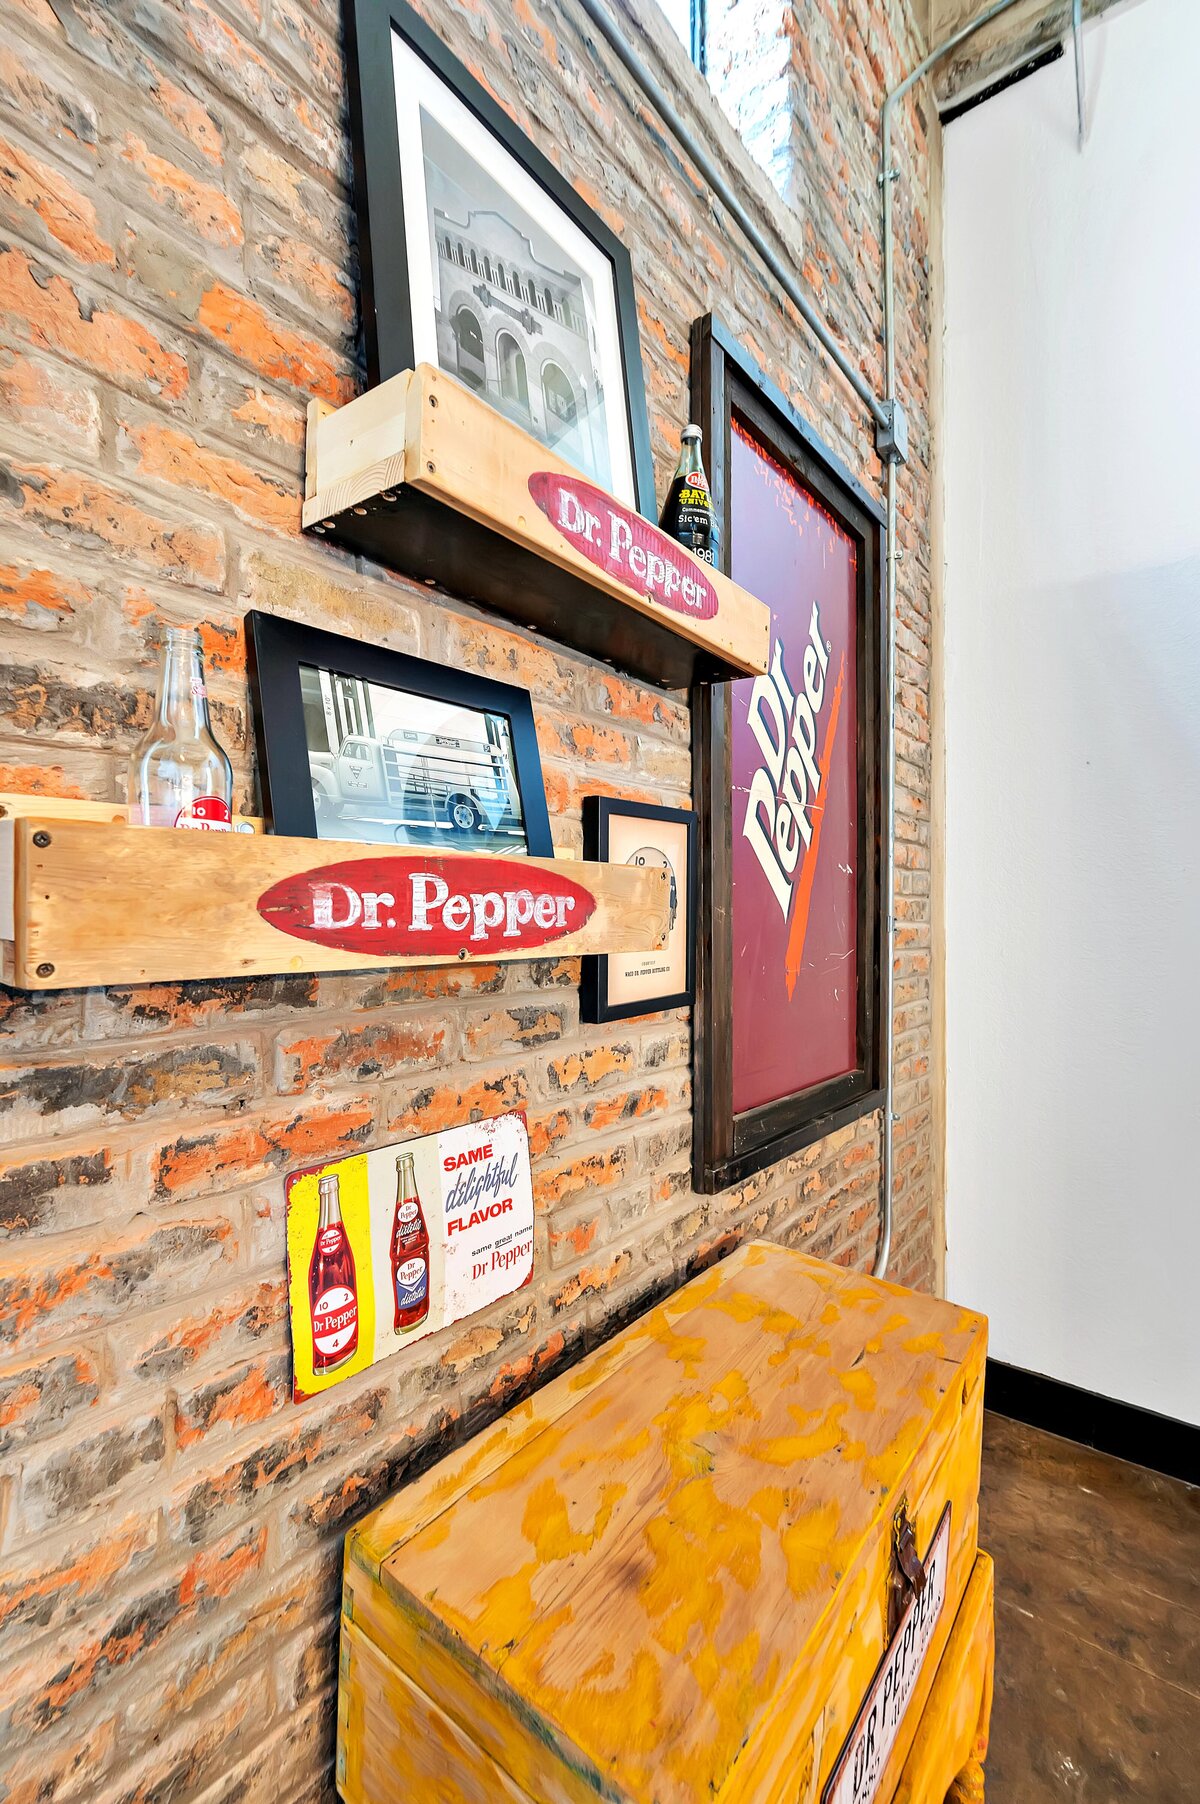 This is a wall displaying the history of Dr. Pepper in the living room of this one-bedroom, one-bathroom vintage industrial condo with Smart TV, free Wi-Fi, and washer/dryer located in downtown Waco, TX.